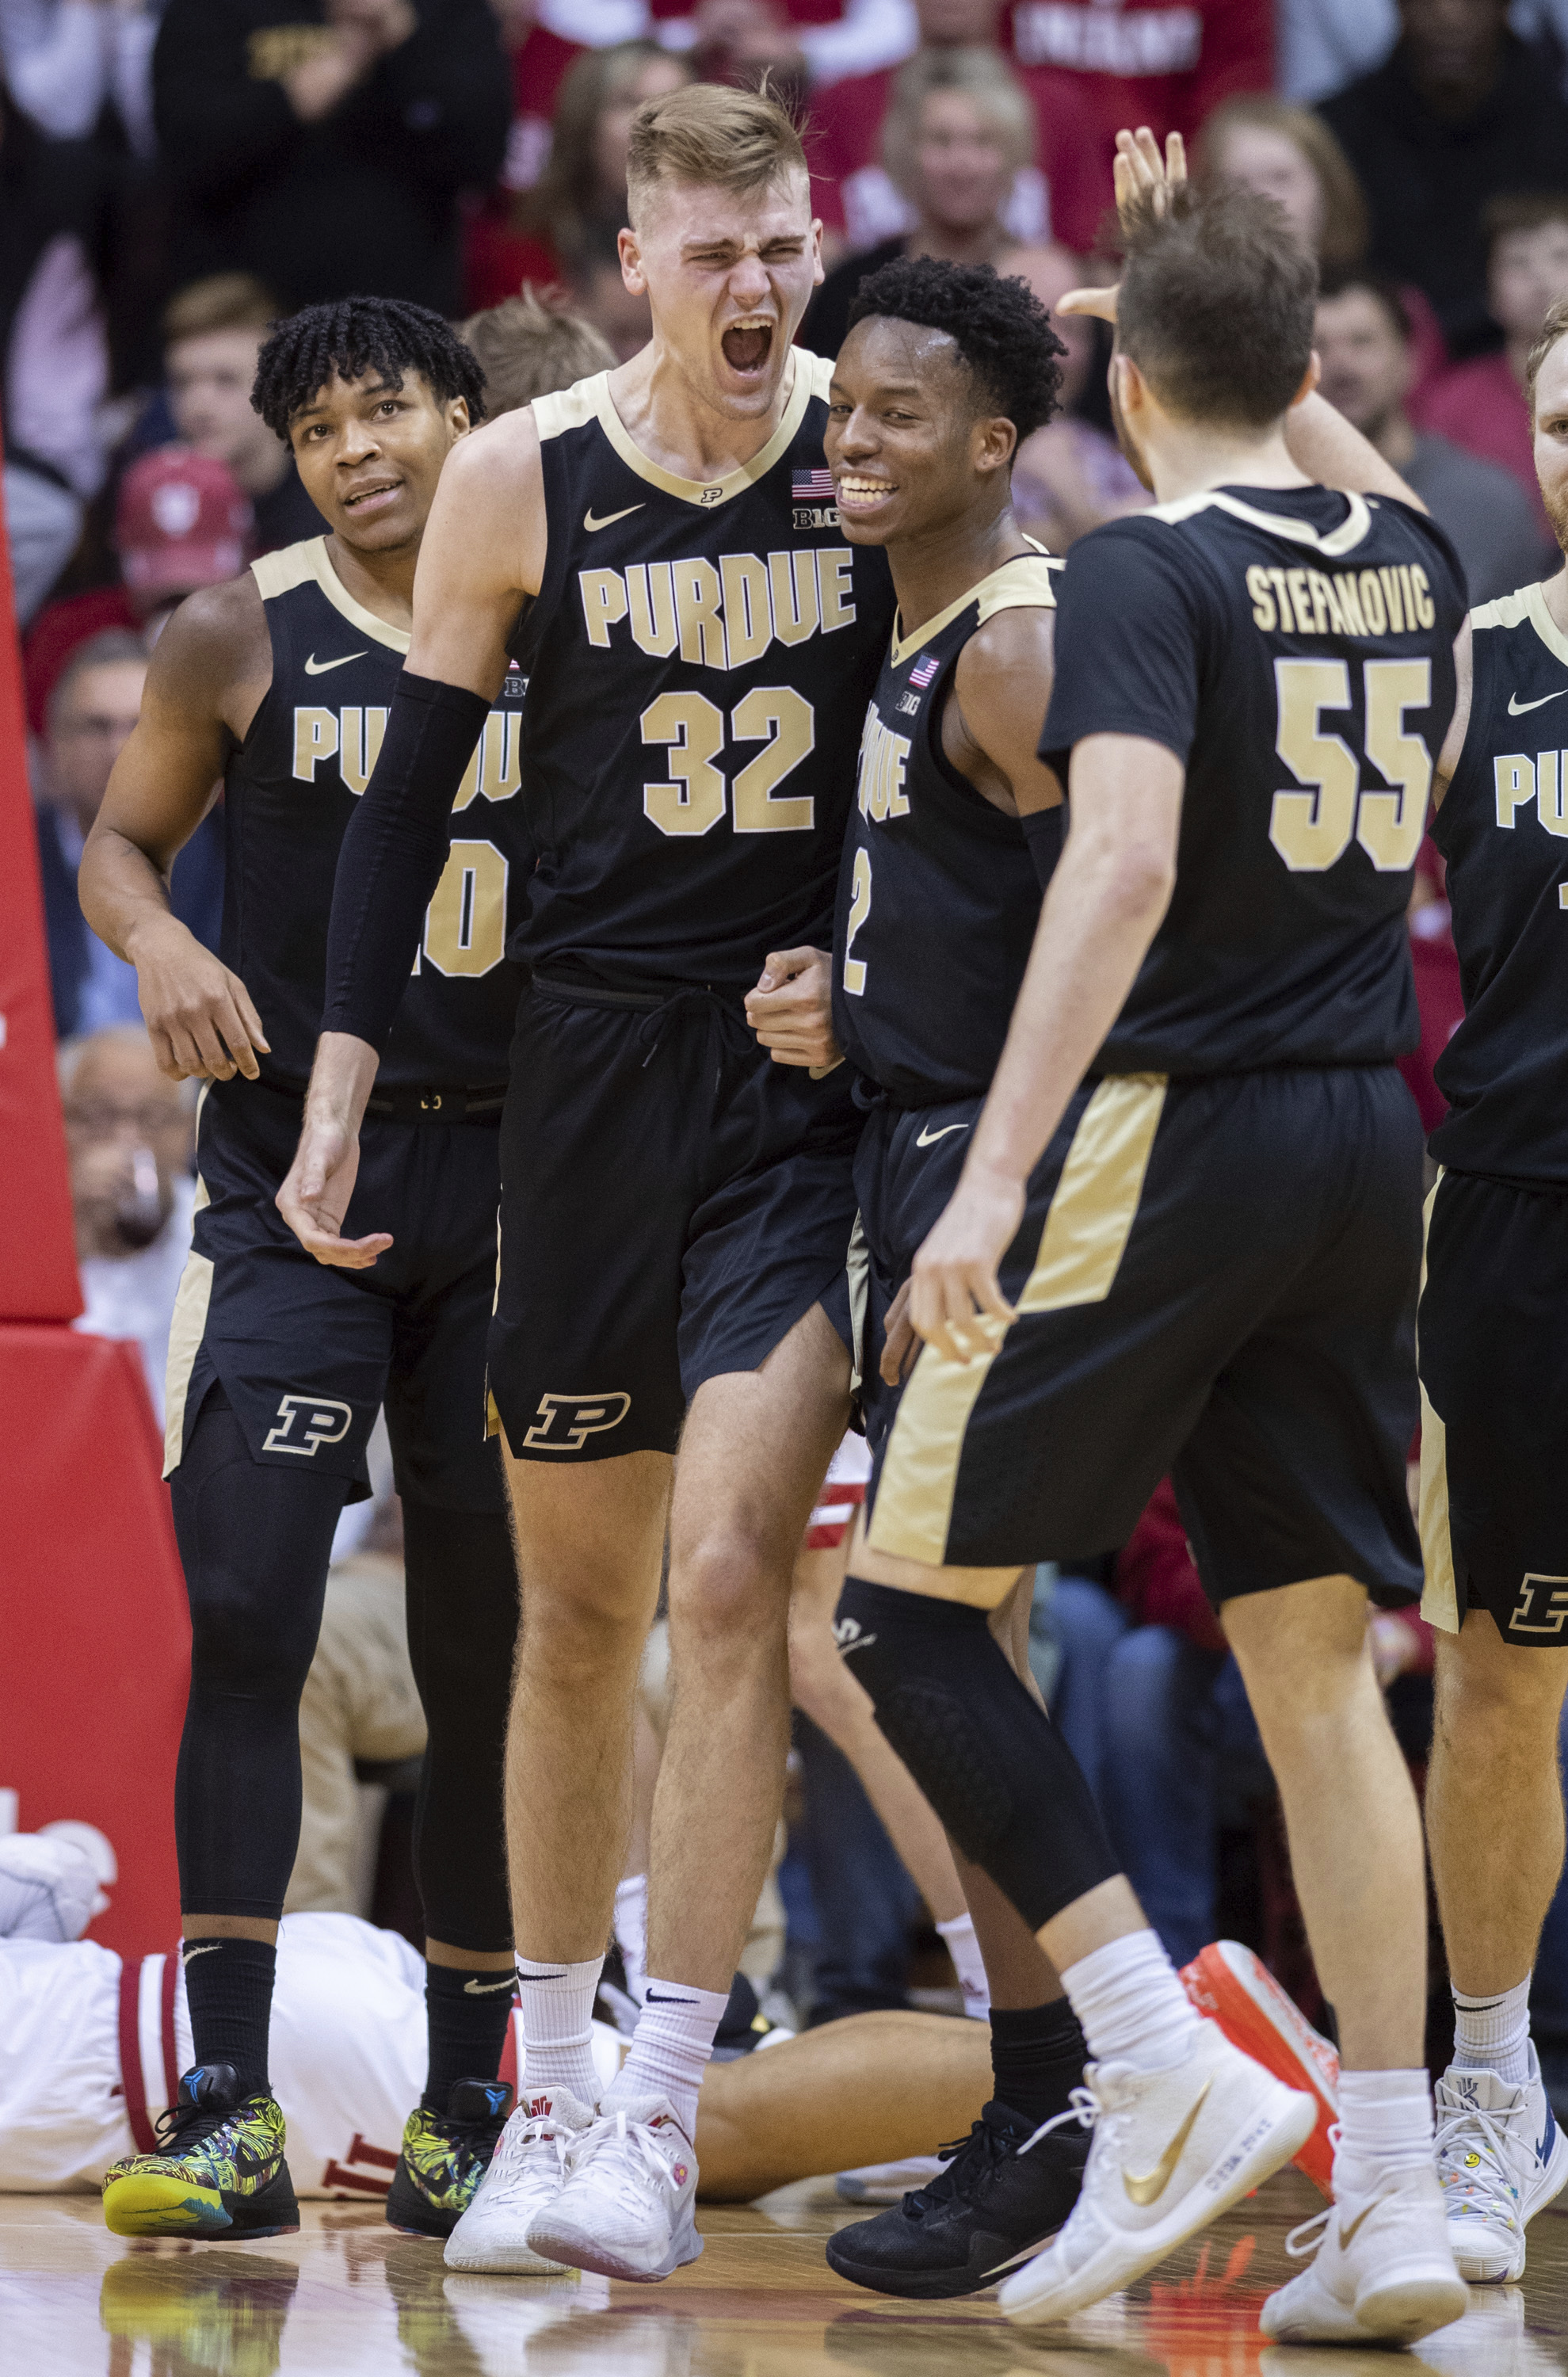 BUBBLE WATCH: Purdue makes push for NCAA bid-securing finish